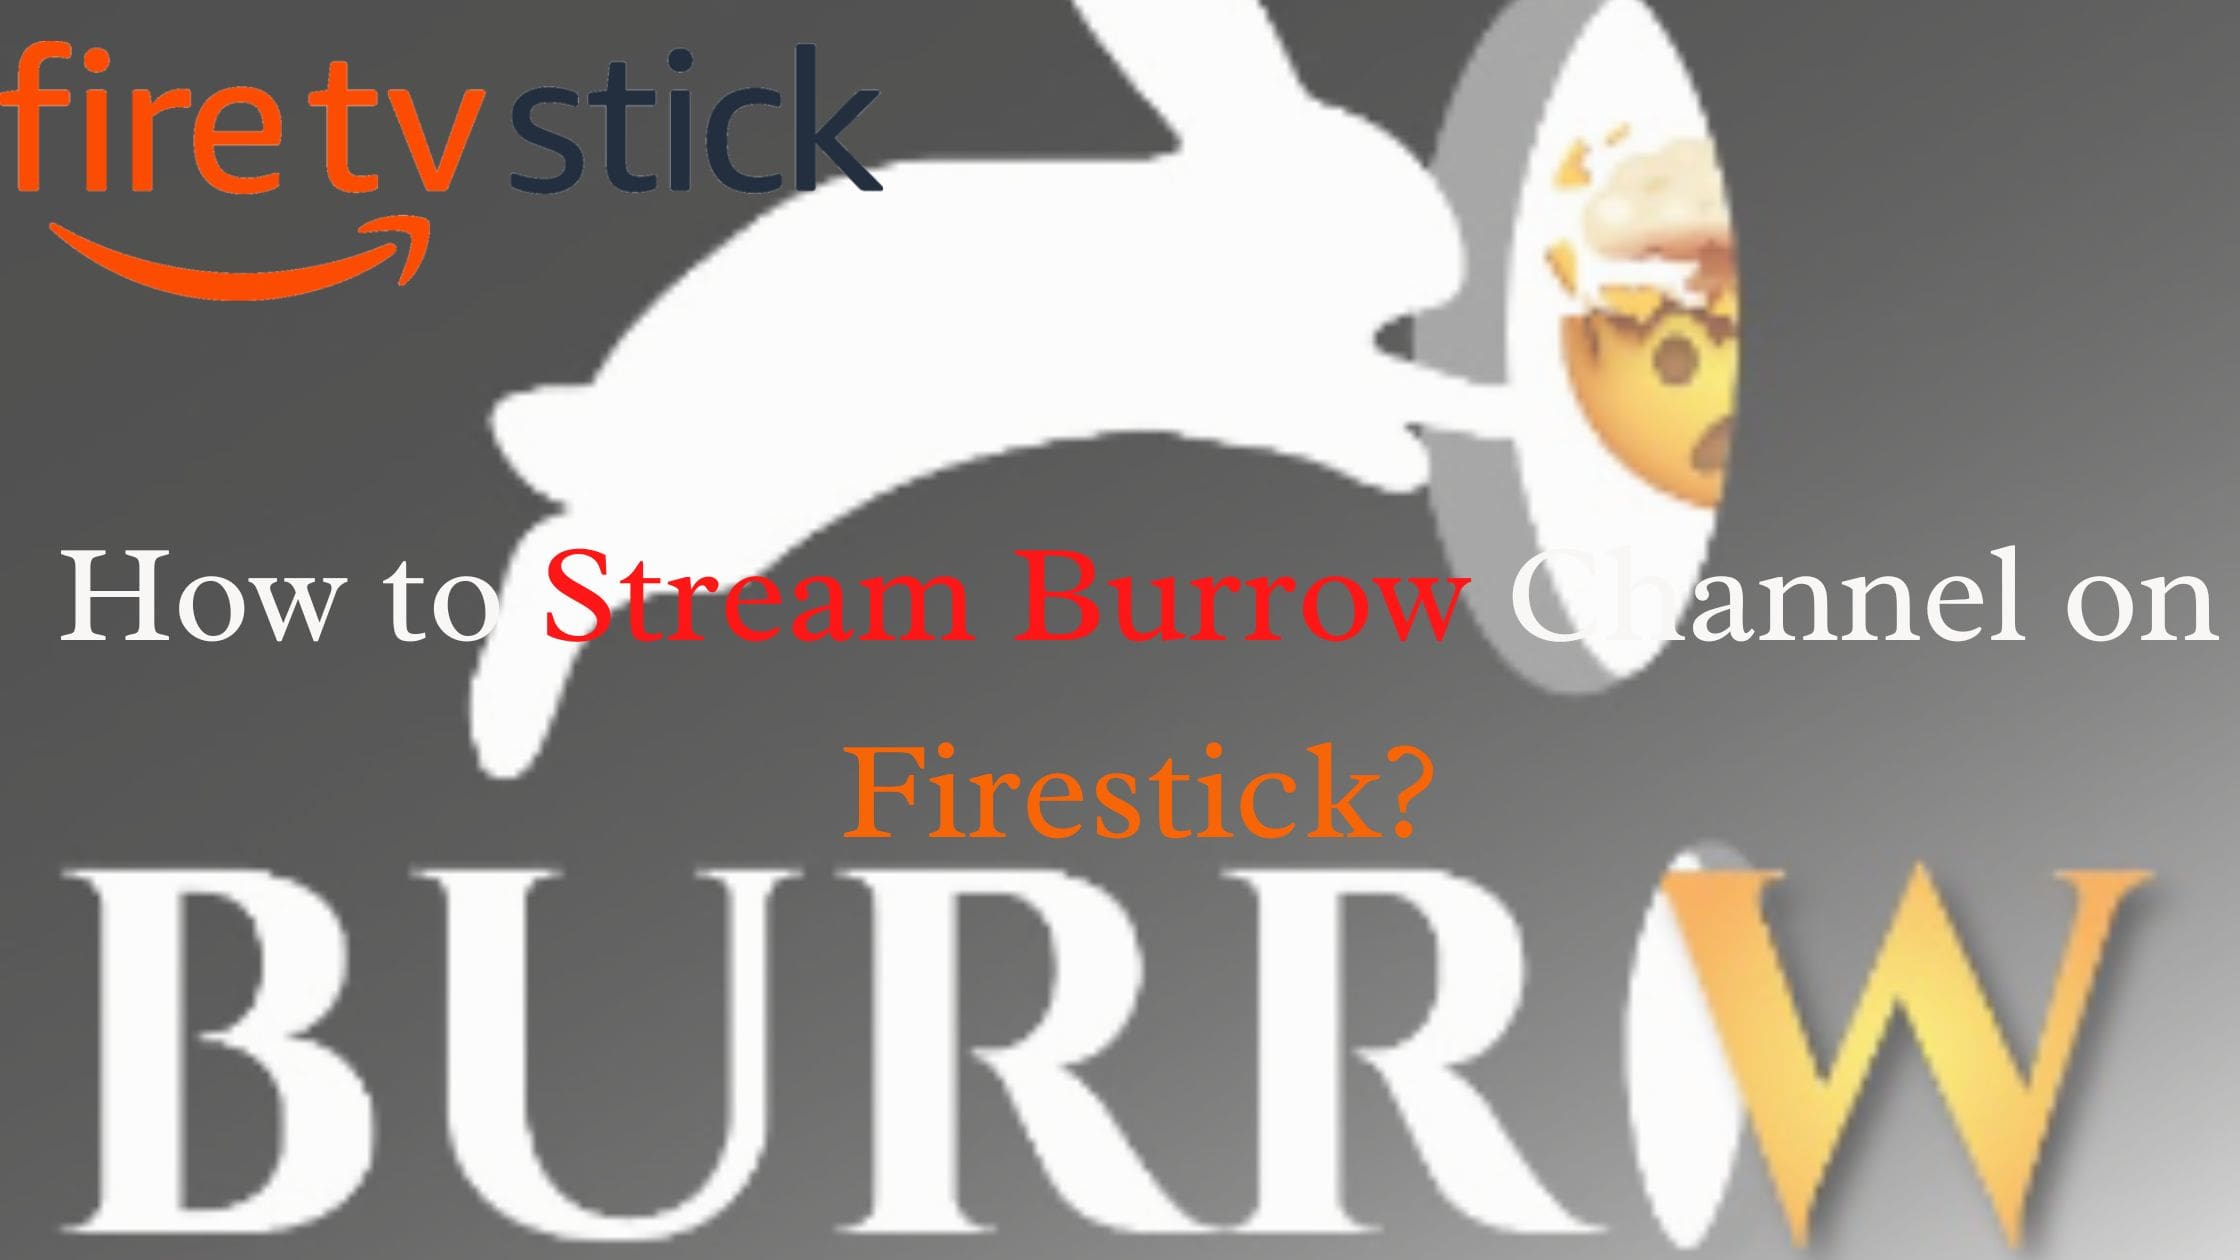 How to Stream Burrow Channel on Firestick